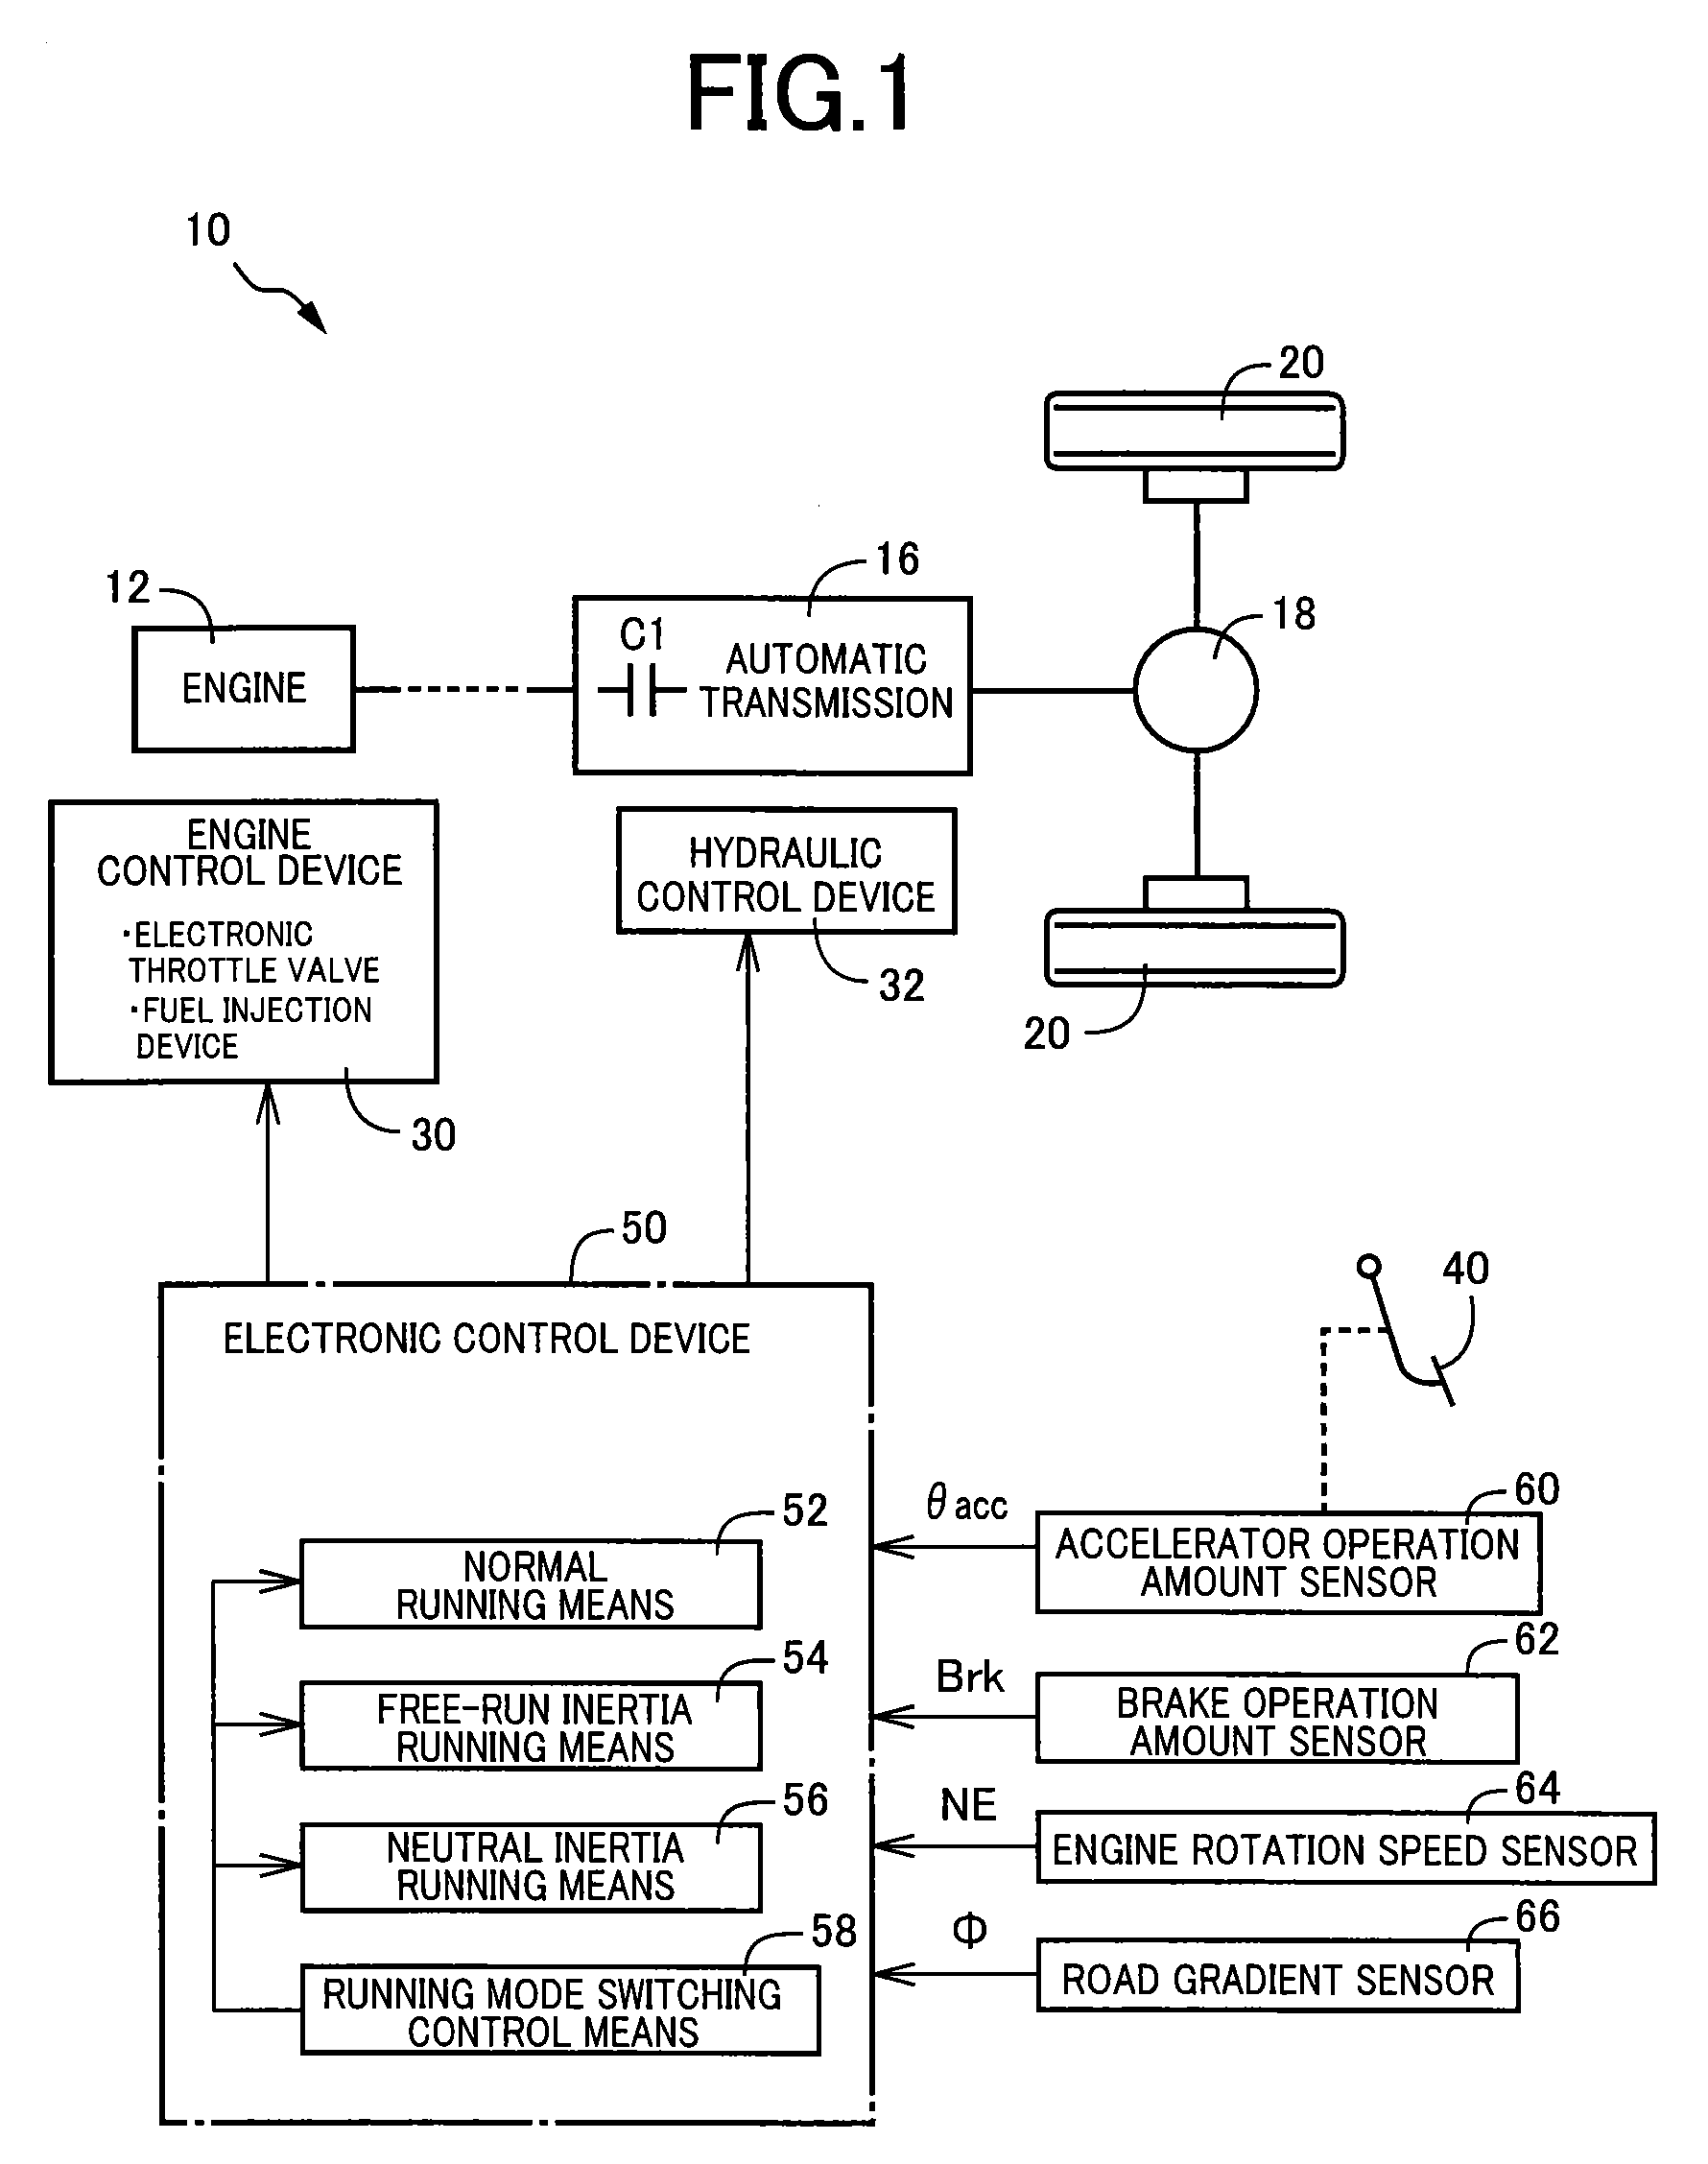 Vehicle drive controller